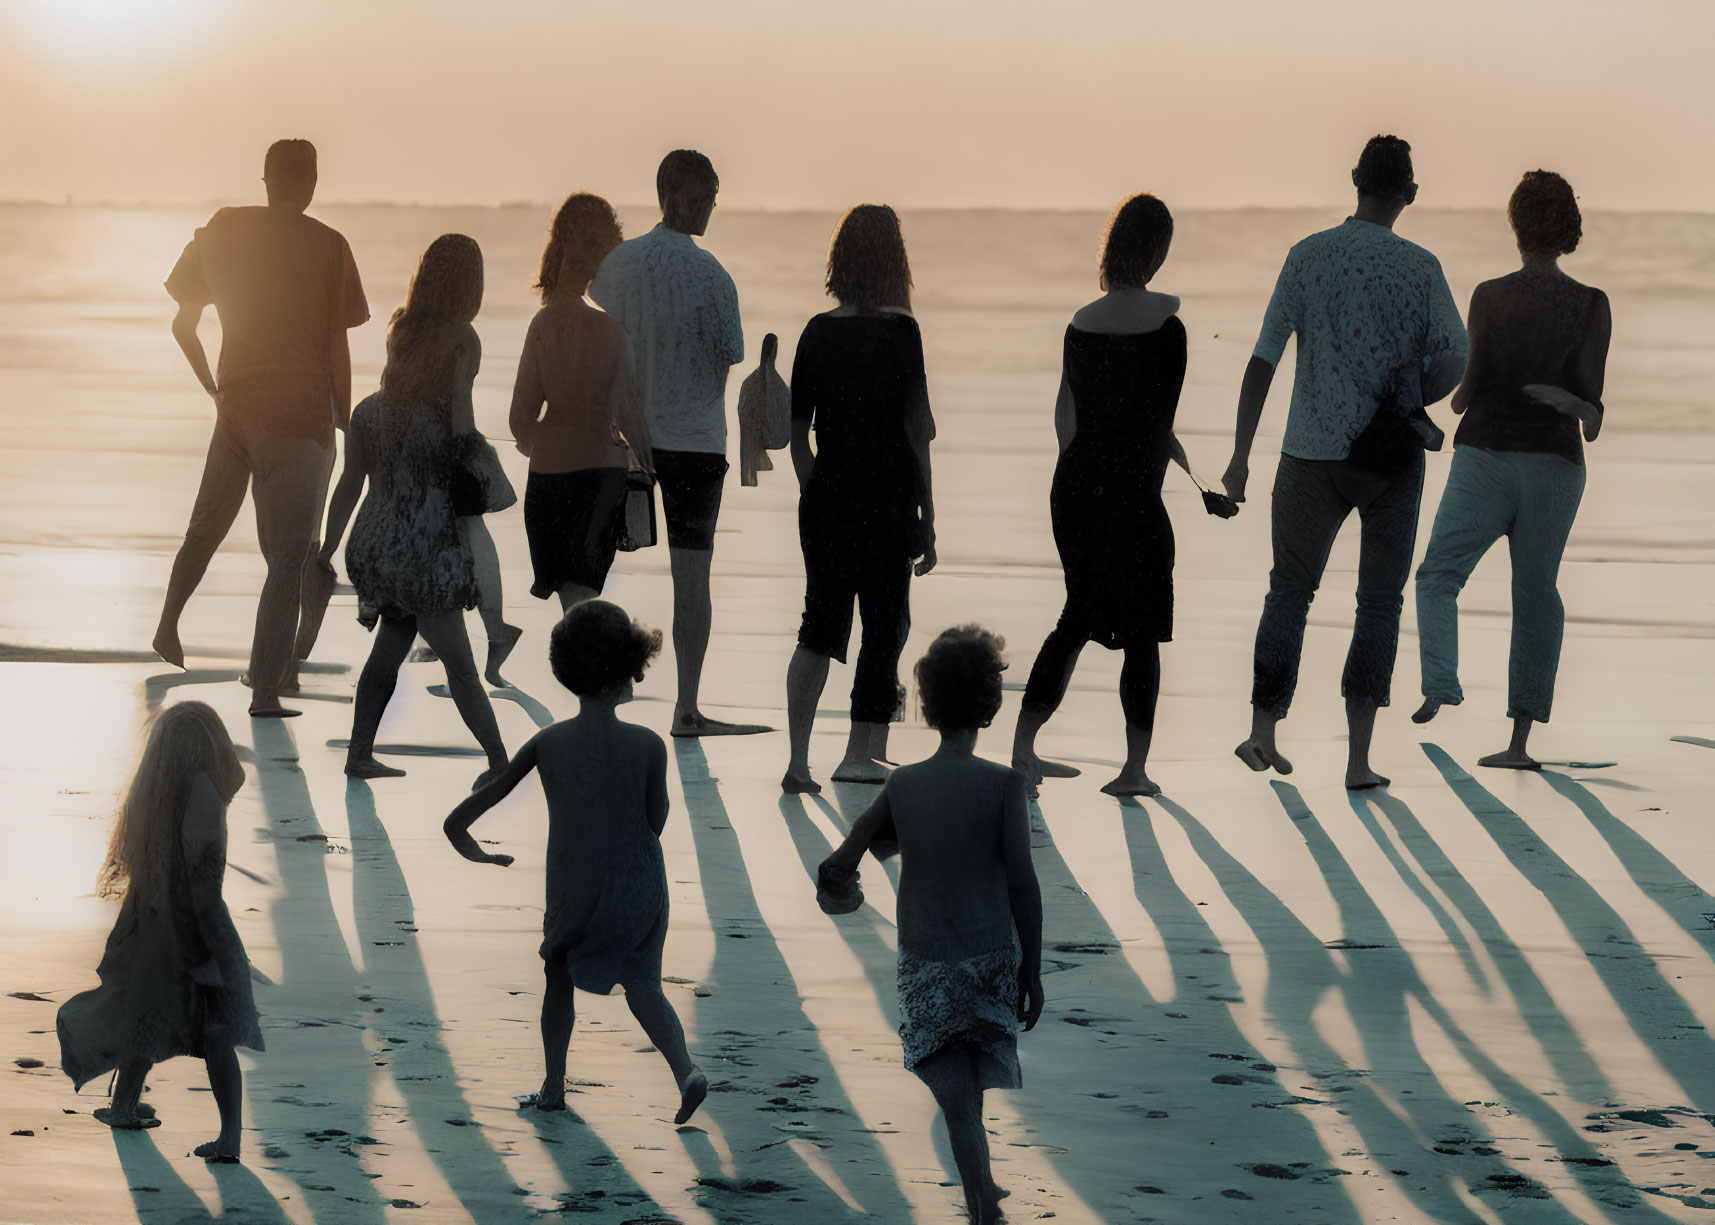 Group of people walking on beach at sunset with long shadows